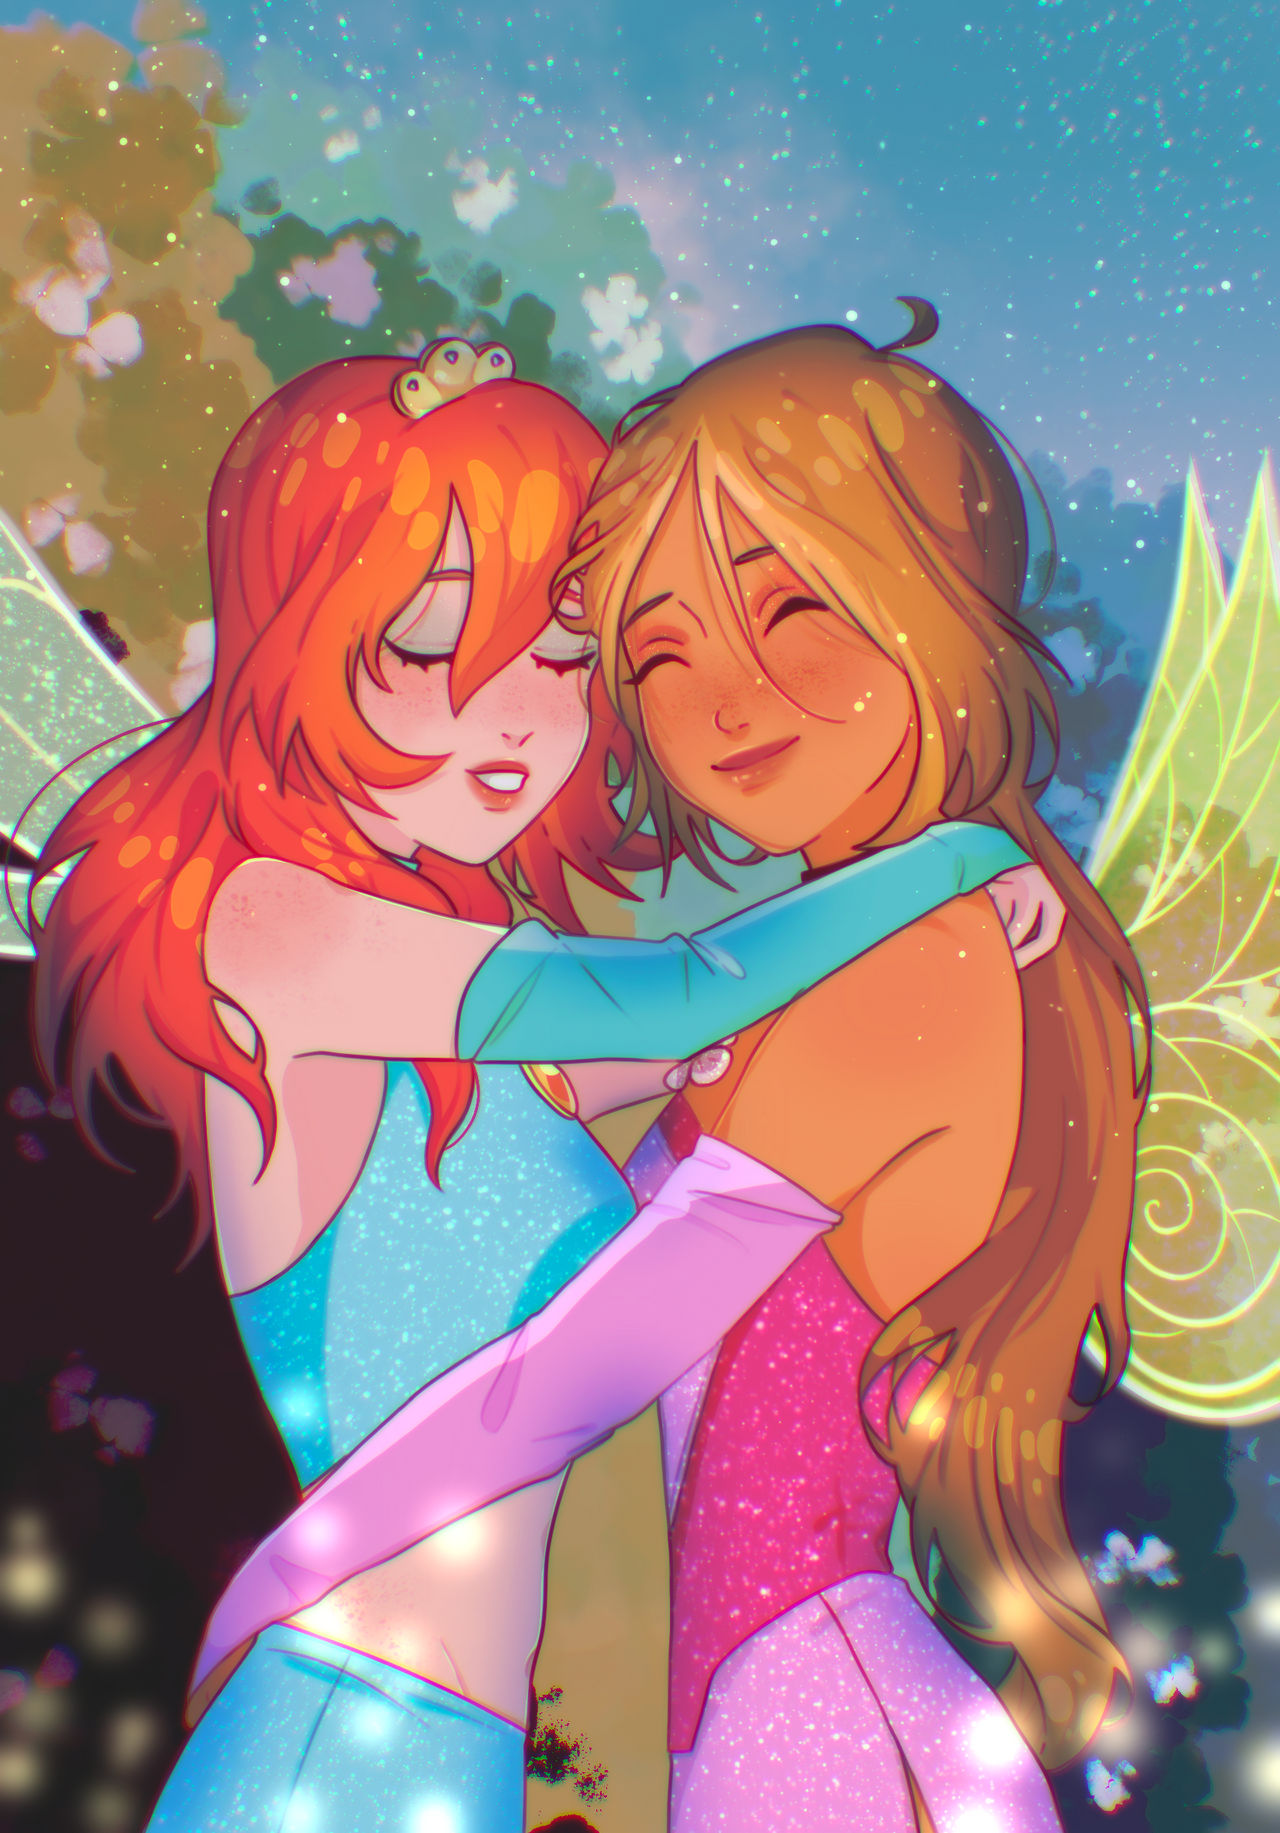 Bloom and Flora [WINX CLUB] by naminpyn on DeviantArt